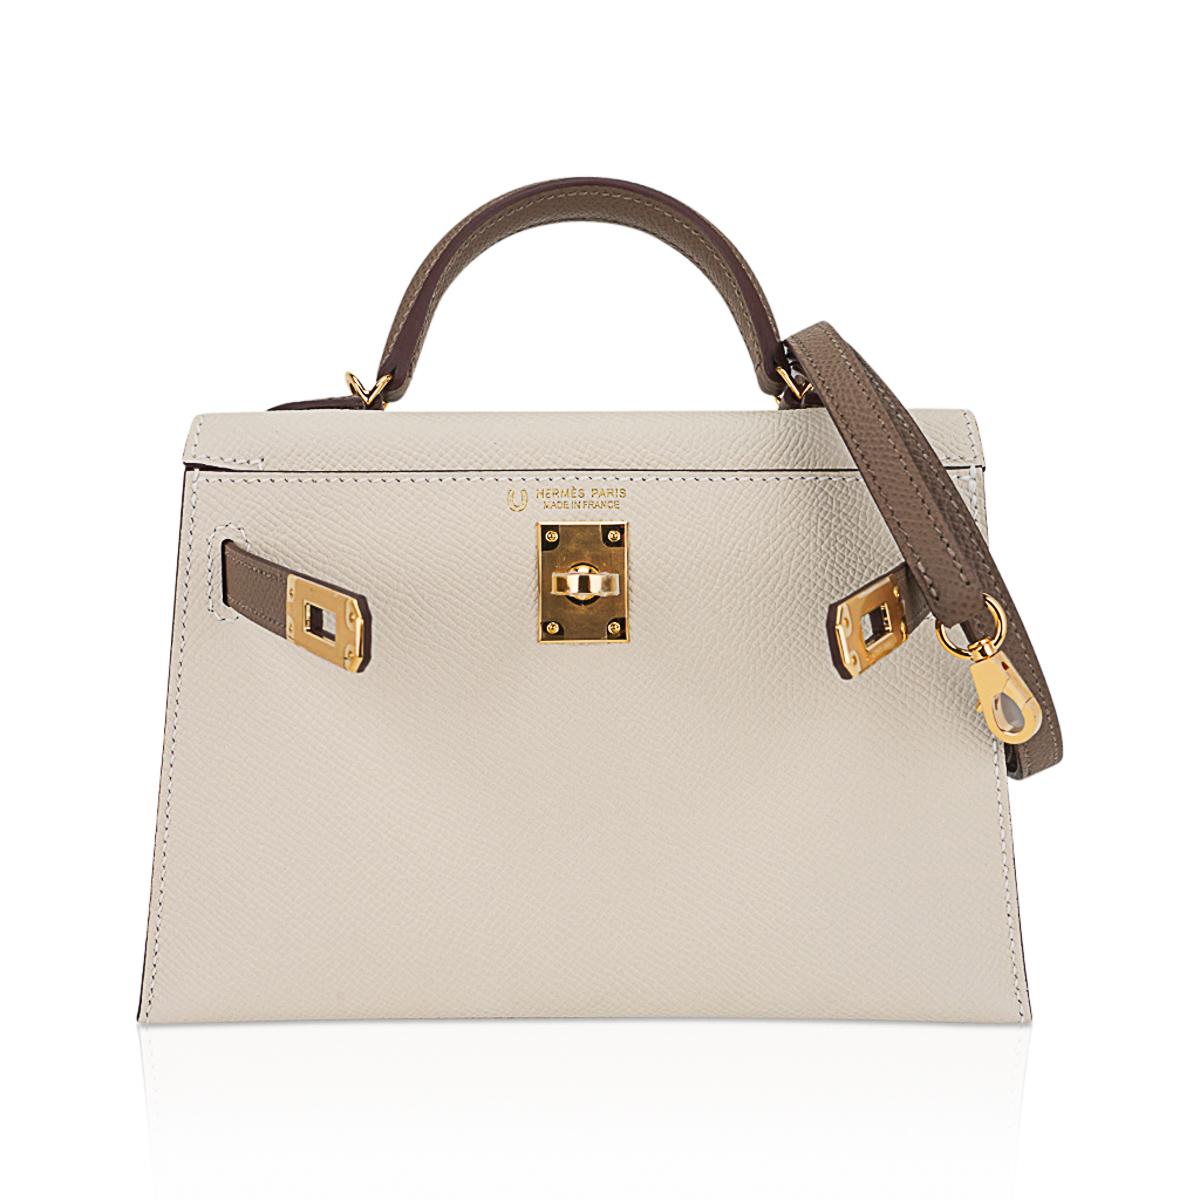 Hermes Kelly HSS 20 Sellier Craie / Etoupe Mini Bag  Gold Hardware Epsom Leather In New Condition For Sale In Miami, FL